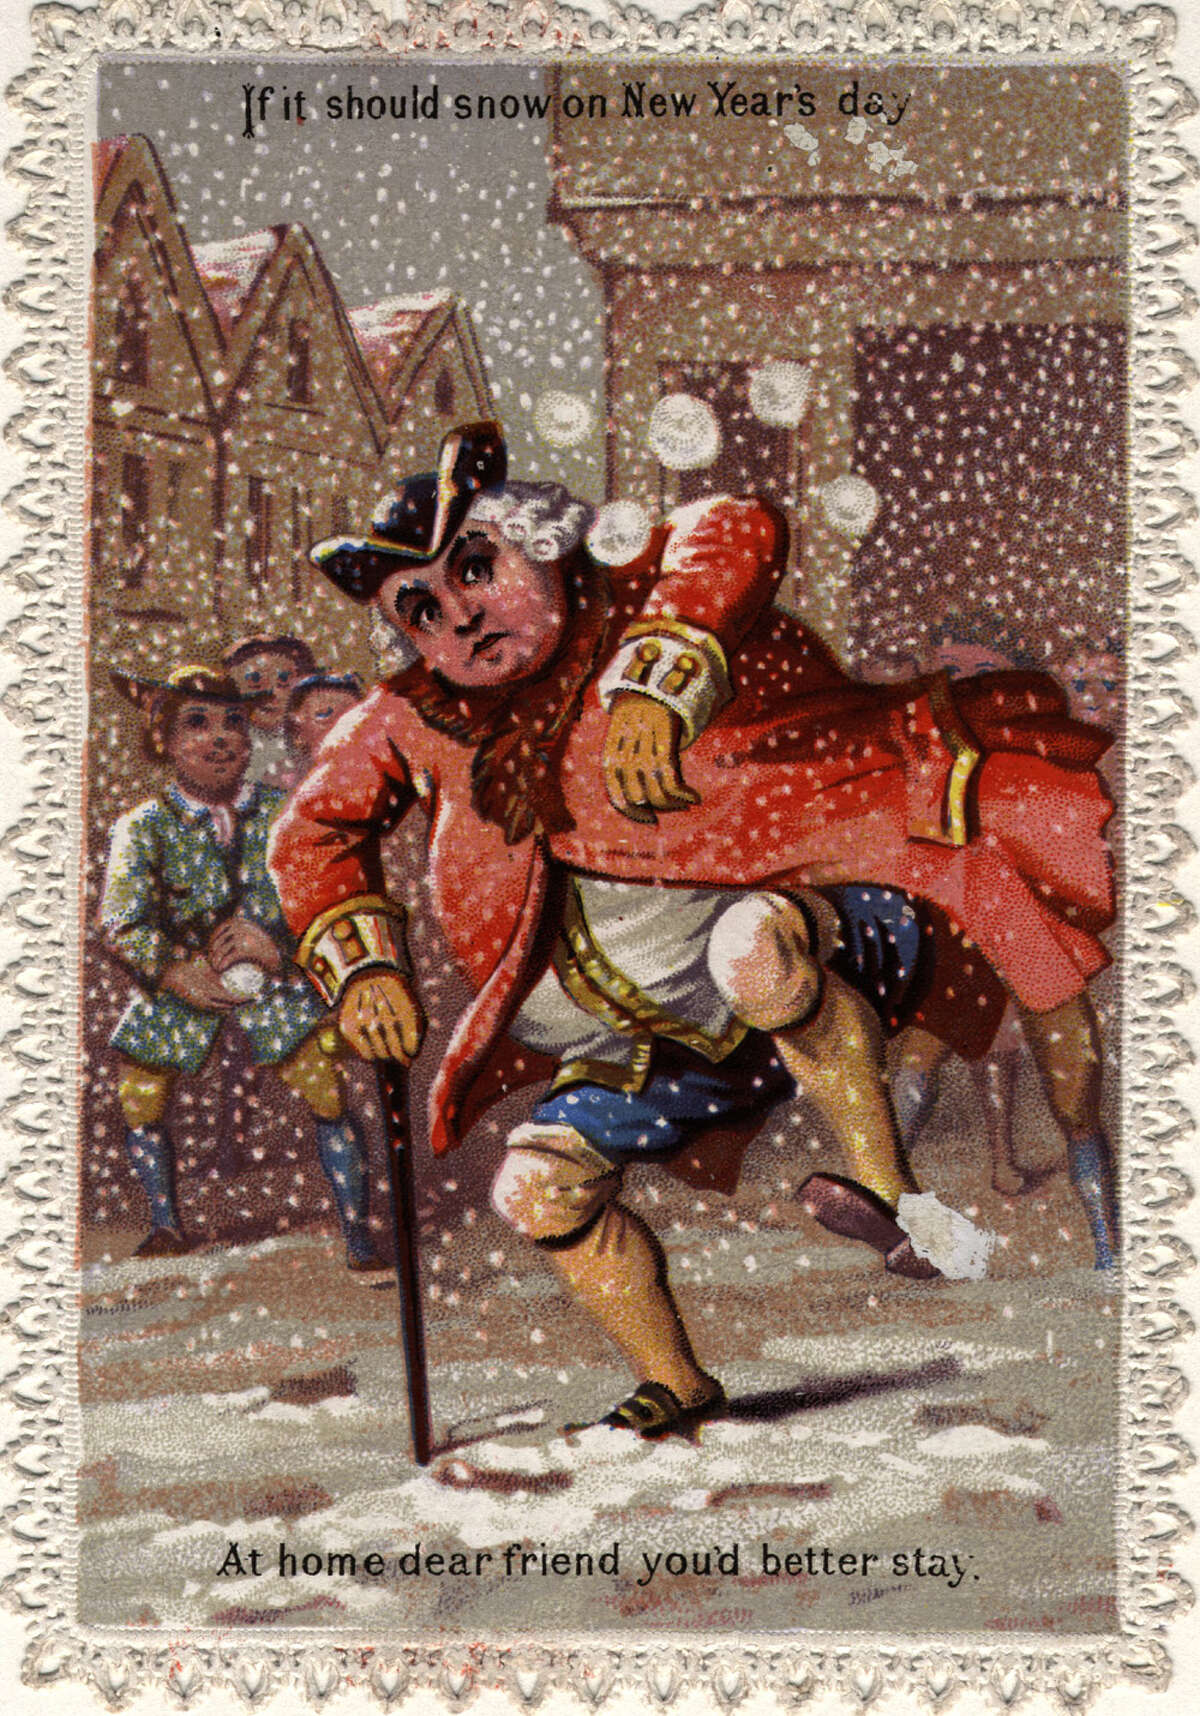 A man is the target of snowballs on this Victorian New Year's greetings card, circa 1873.